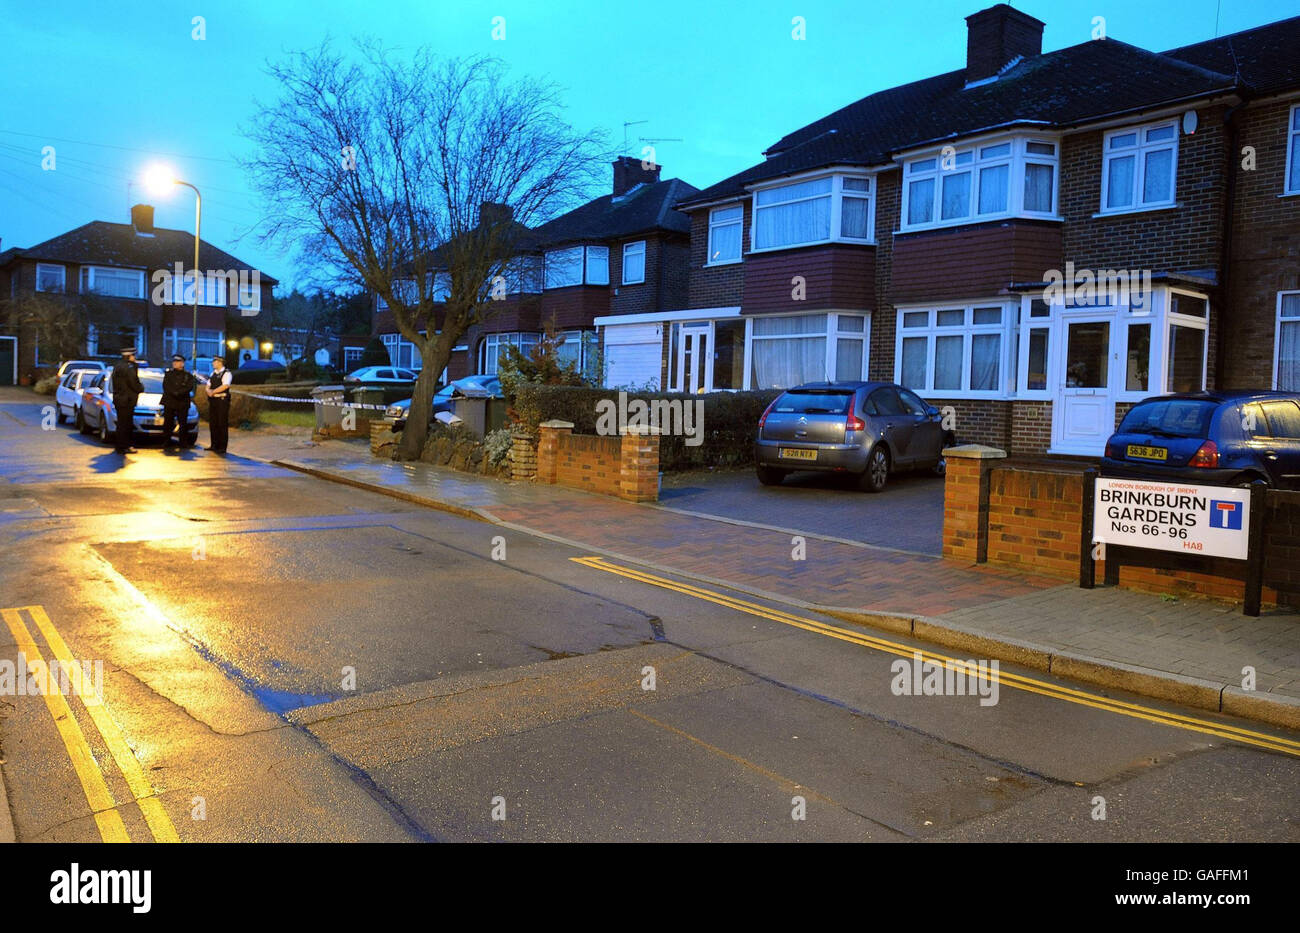 Police officers (left) at the scene in Wembley, north London, after a policeman died after he attended a 'domestic incident' in in Brinkburn Gardens, Wembley. Stock Photo